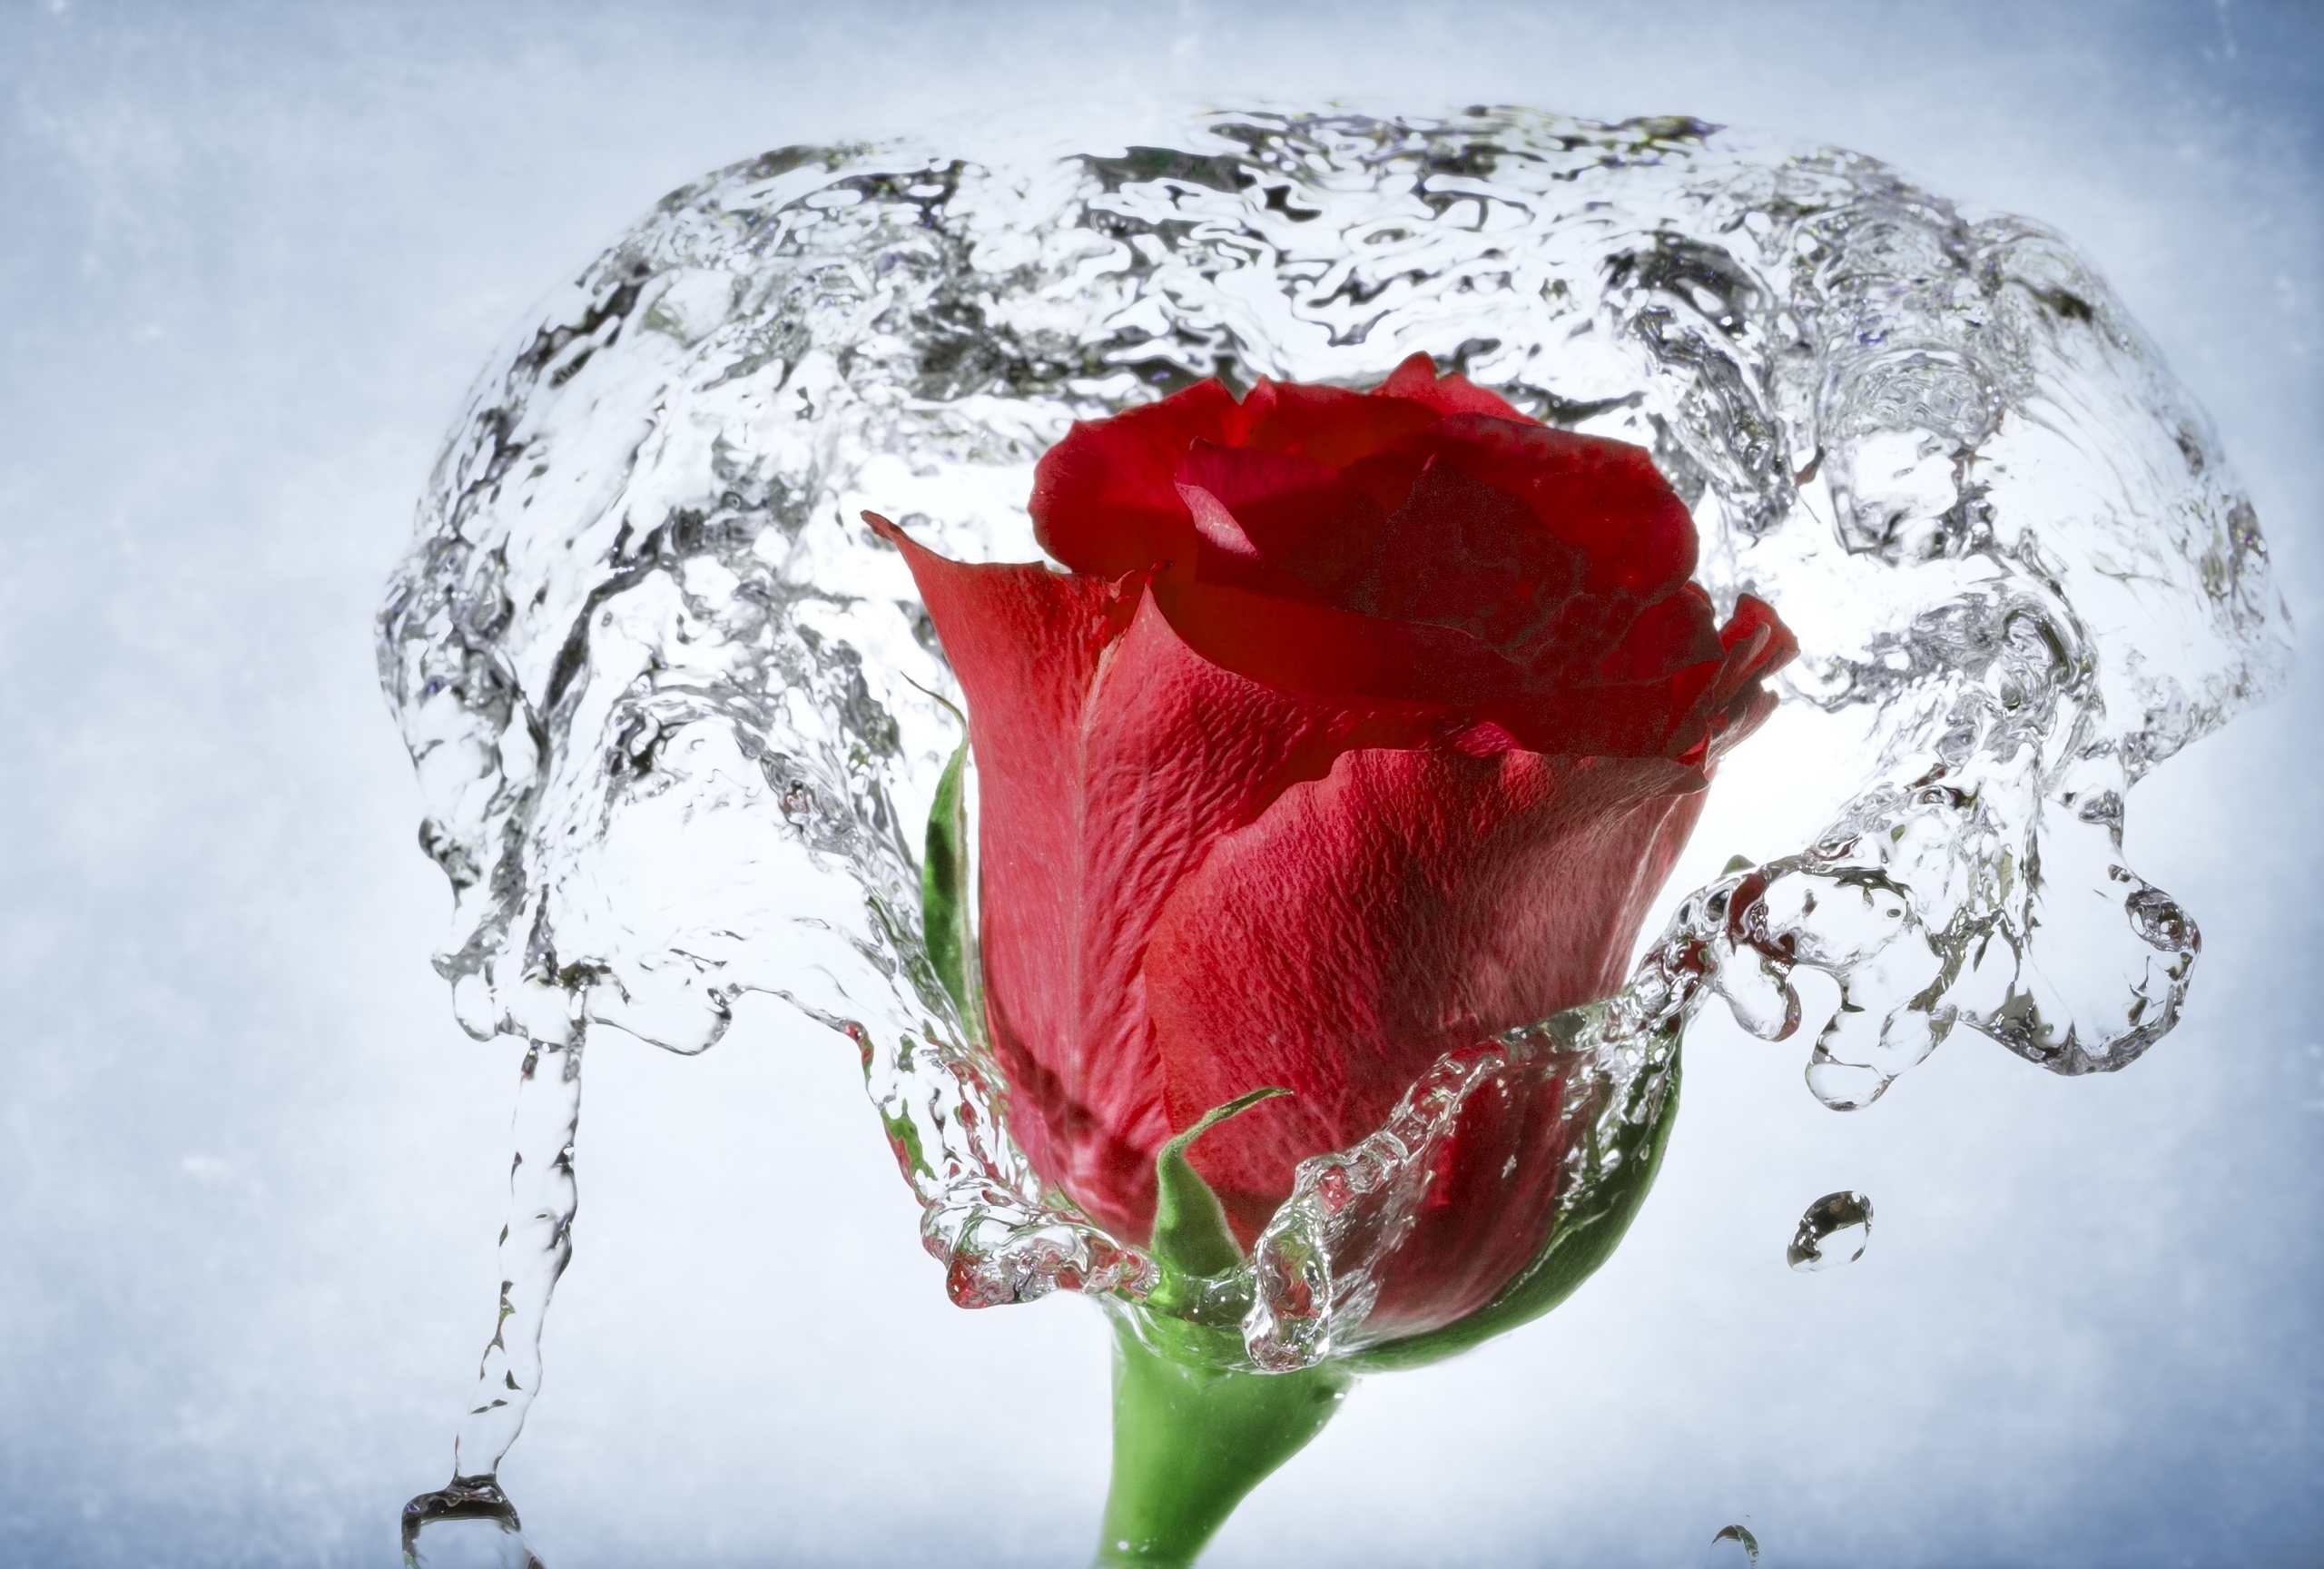 rose red with water so beautiful free hd 4k background wallpapers